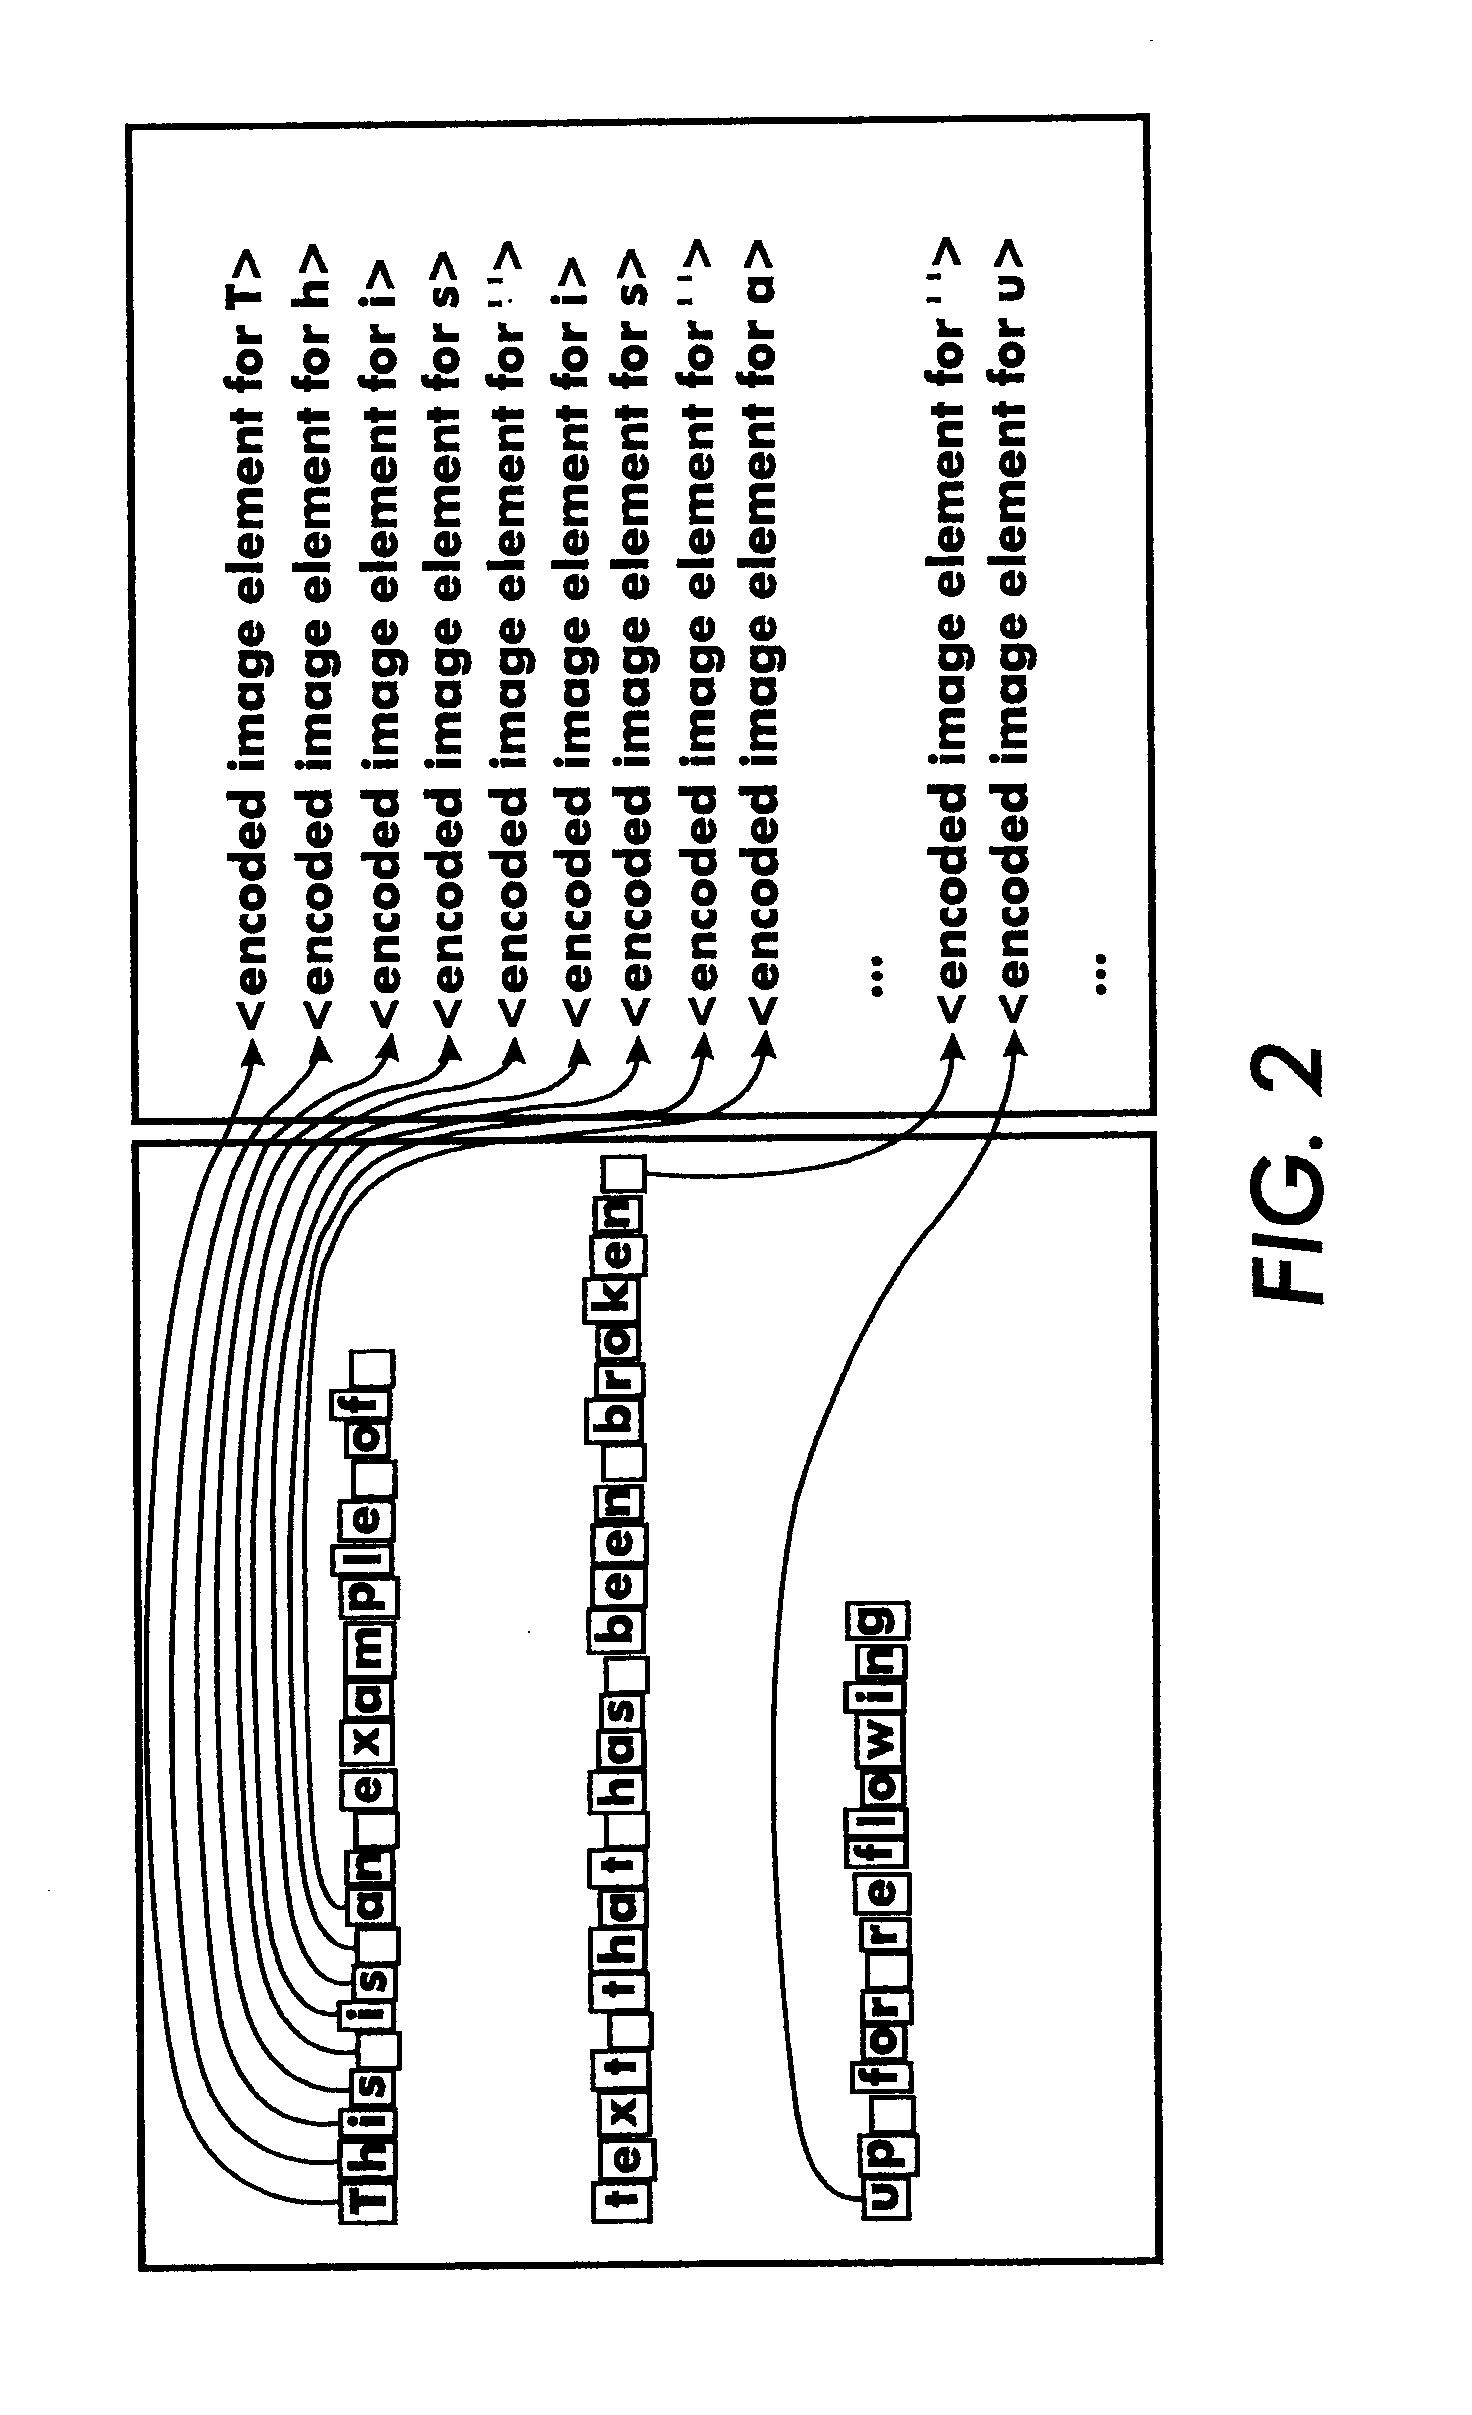 Method and system for document image layout deconstruction and redisplay